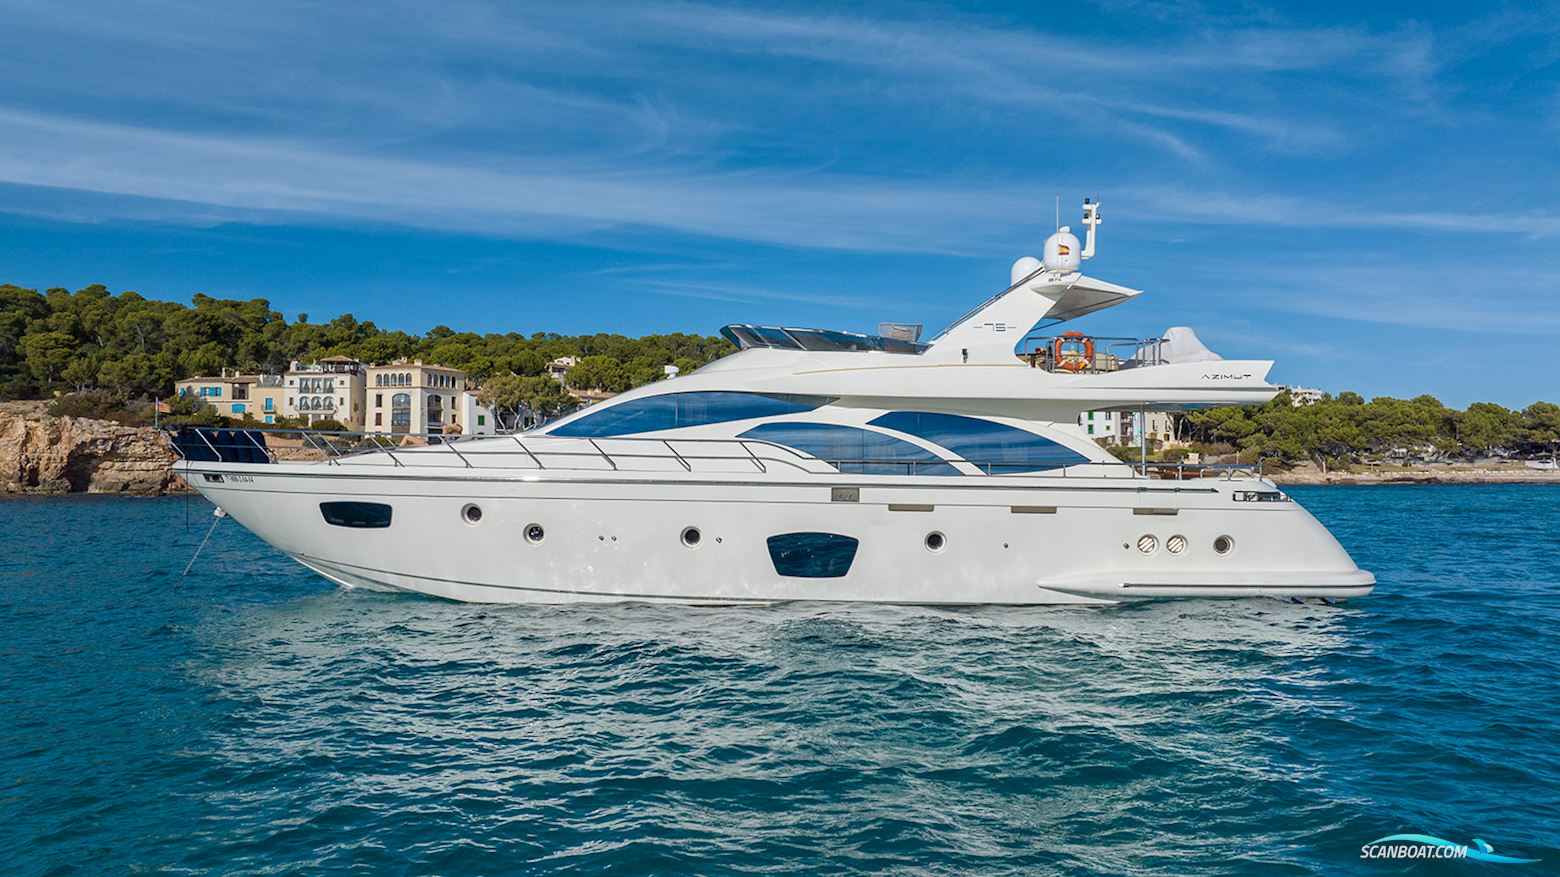 Azimut 75 Flybridge, First Launched 2013, Fin Stabilized Motorbåt 2008, Holland